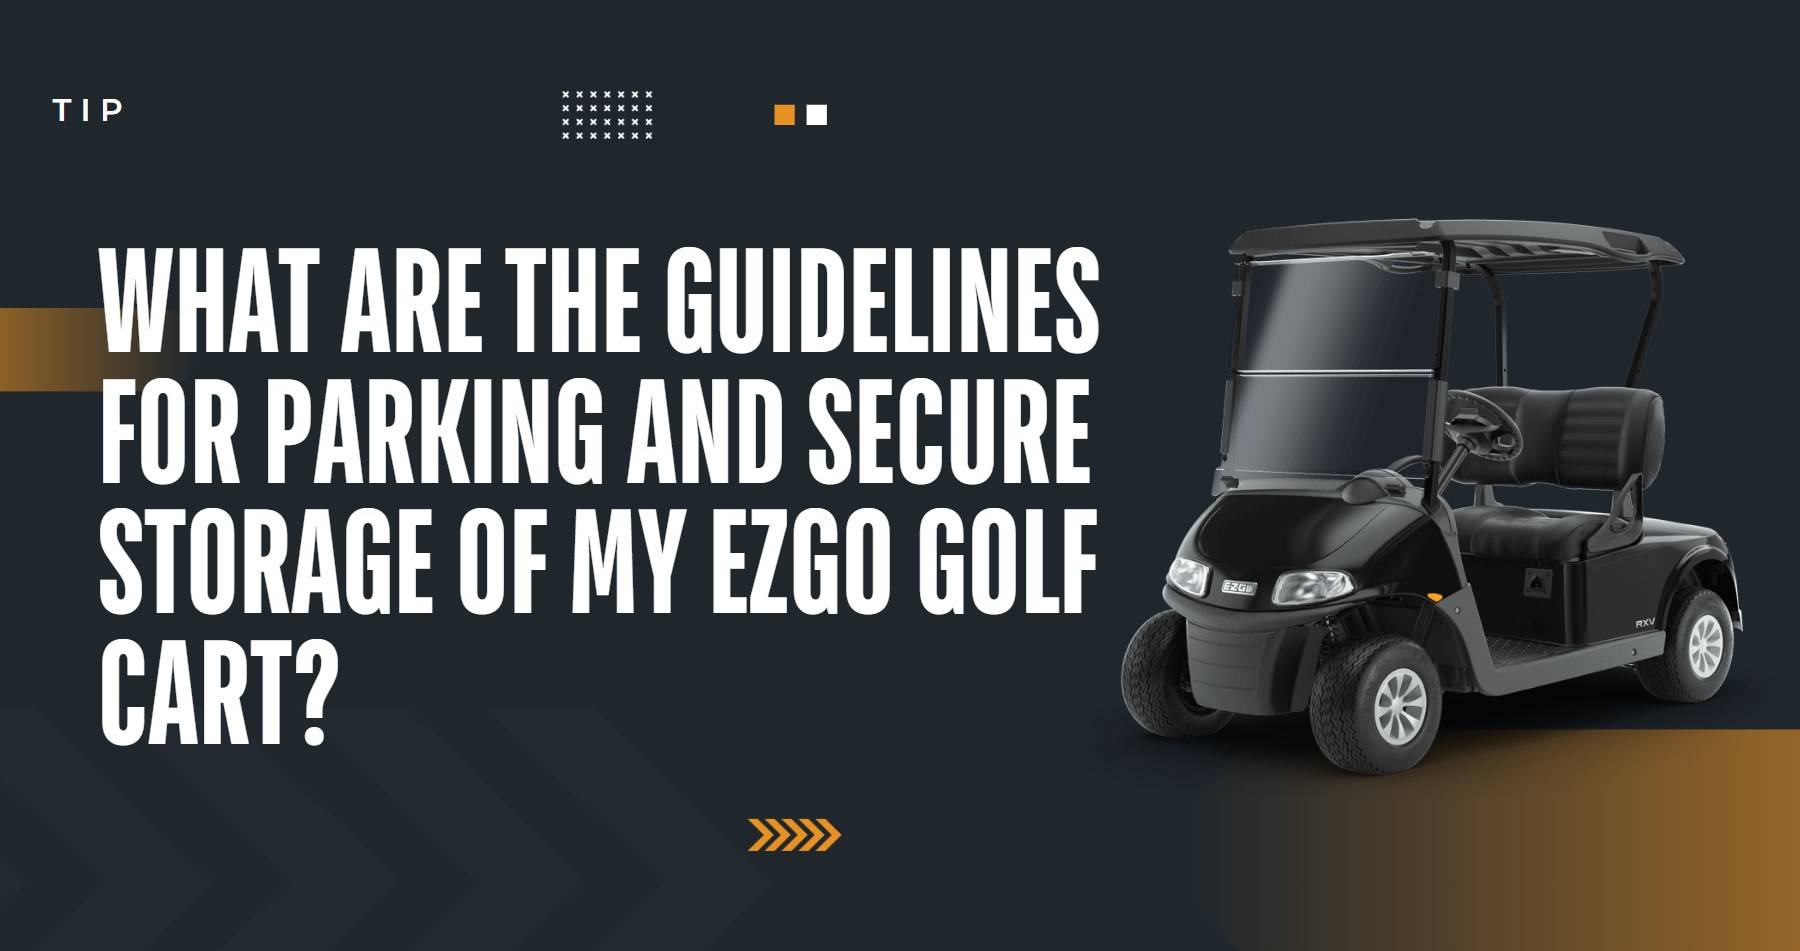 What are the guidelines for parking and secure storage of my EZGO golf cart?